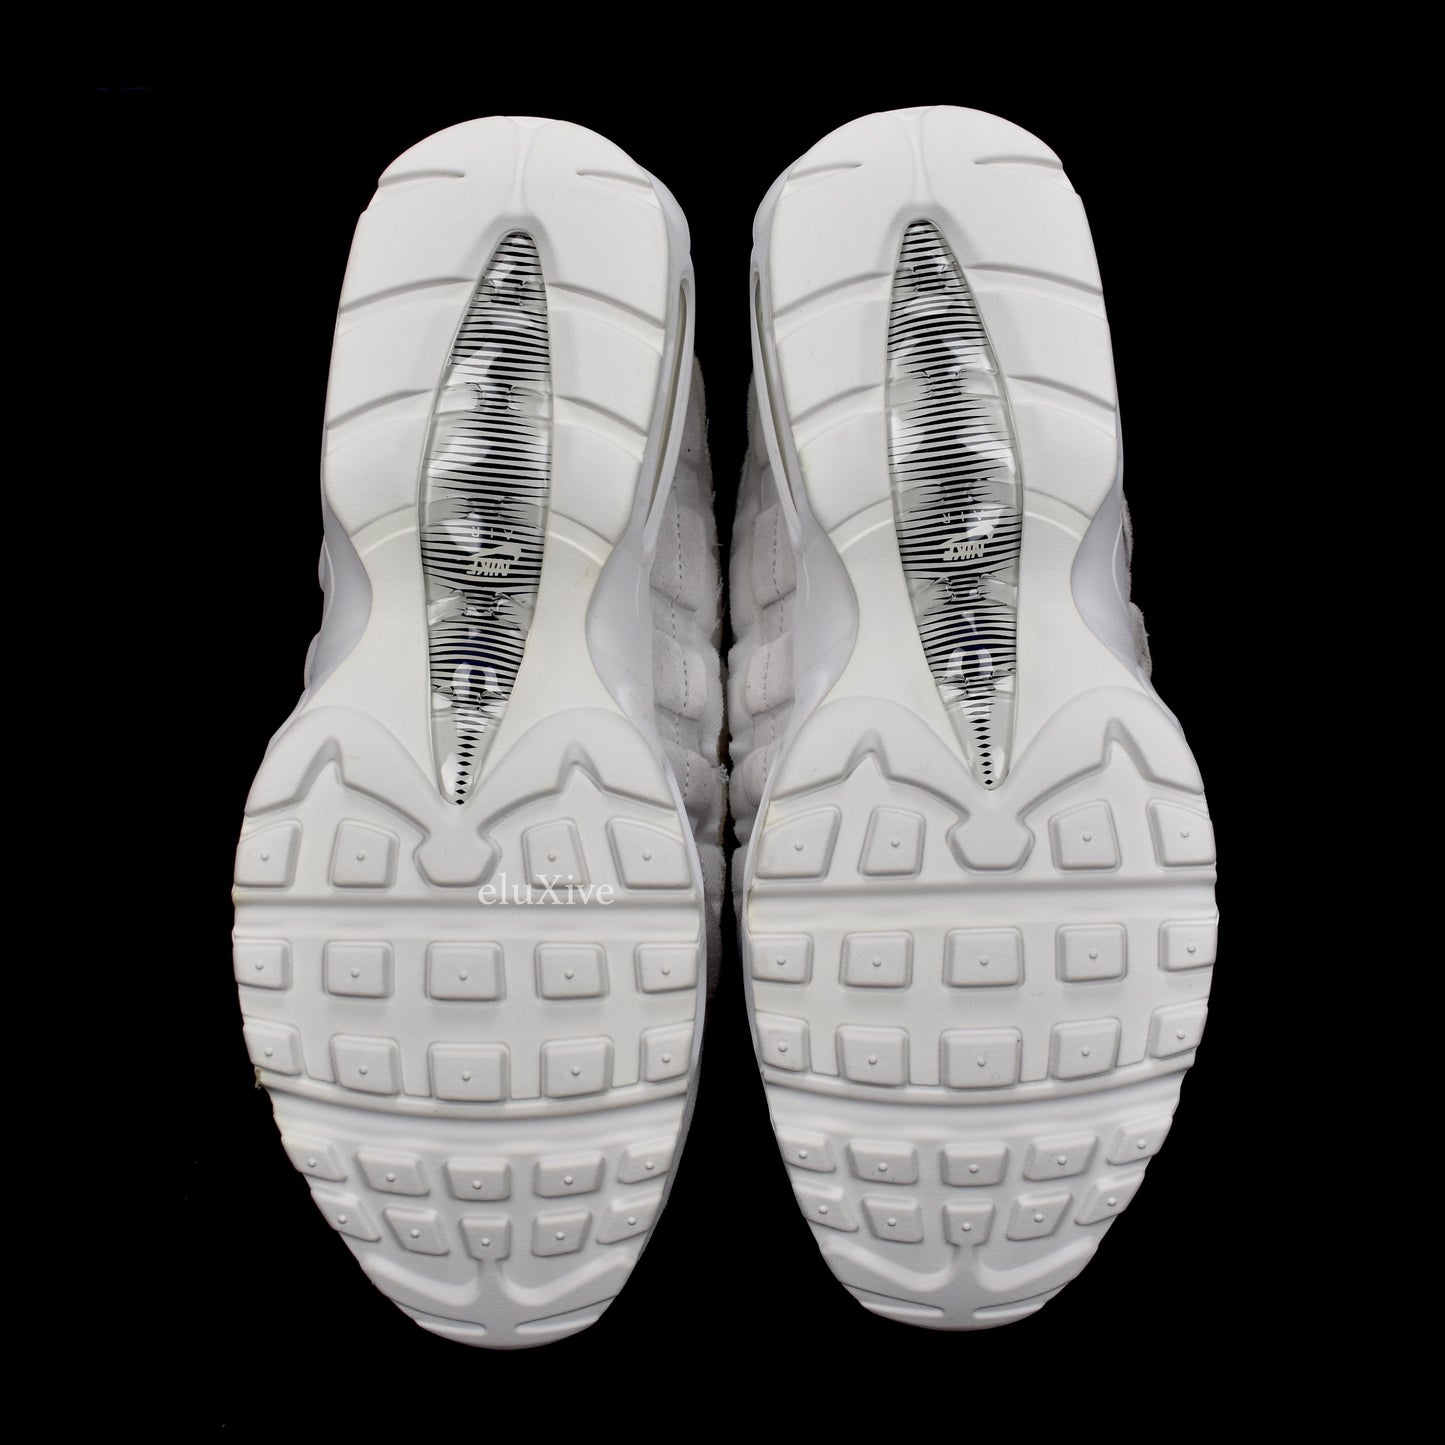 Comme des Garcons x Nike - Air Max 95 CDG (White)